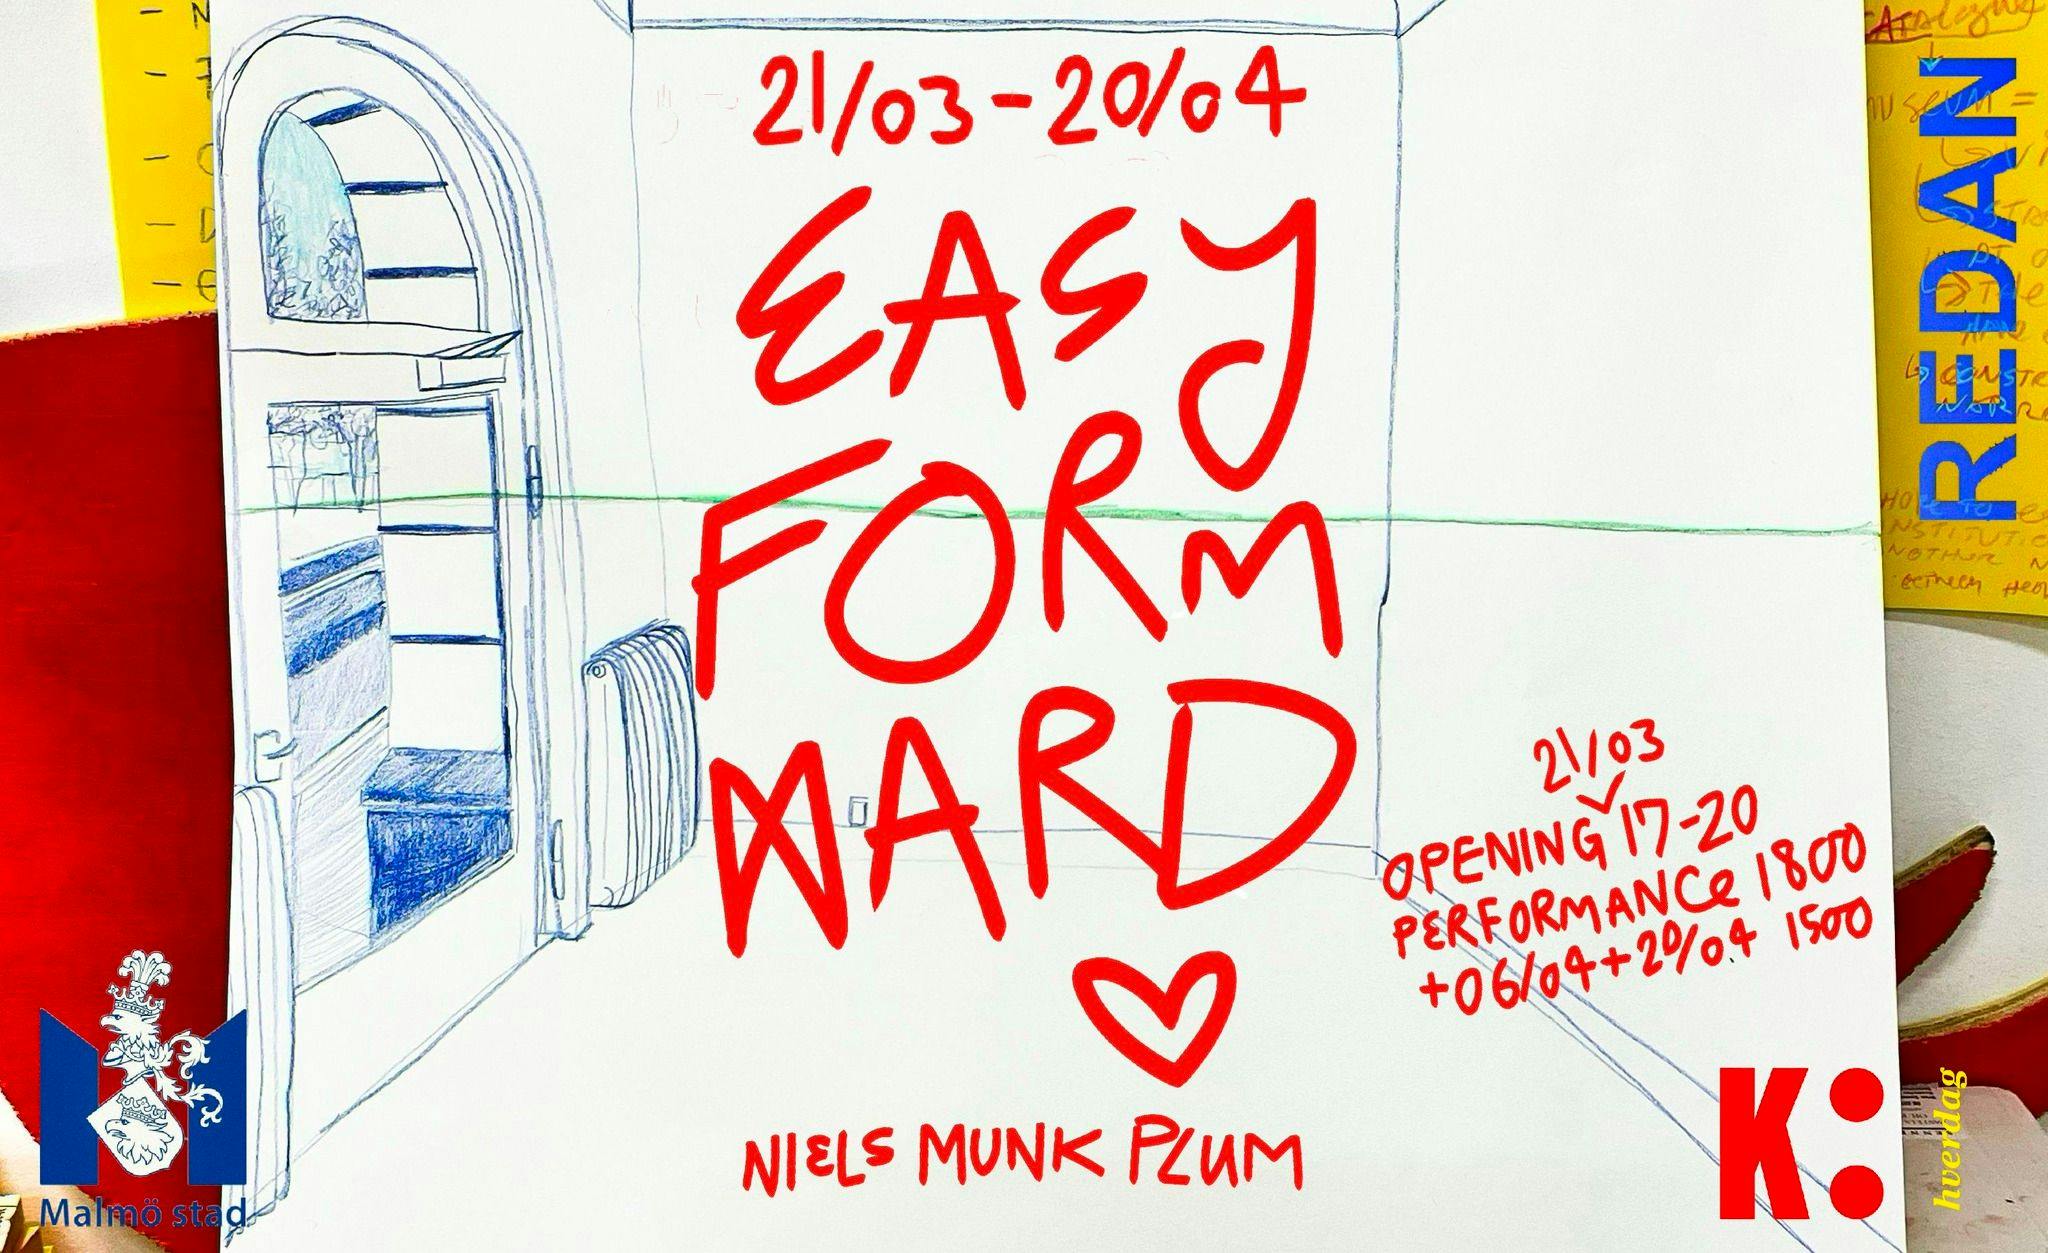 Cover image for EASY FORM HARD